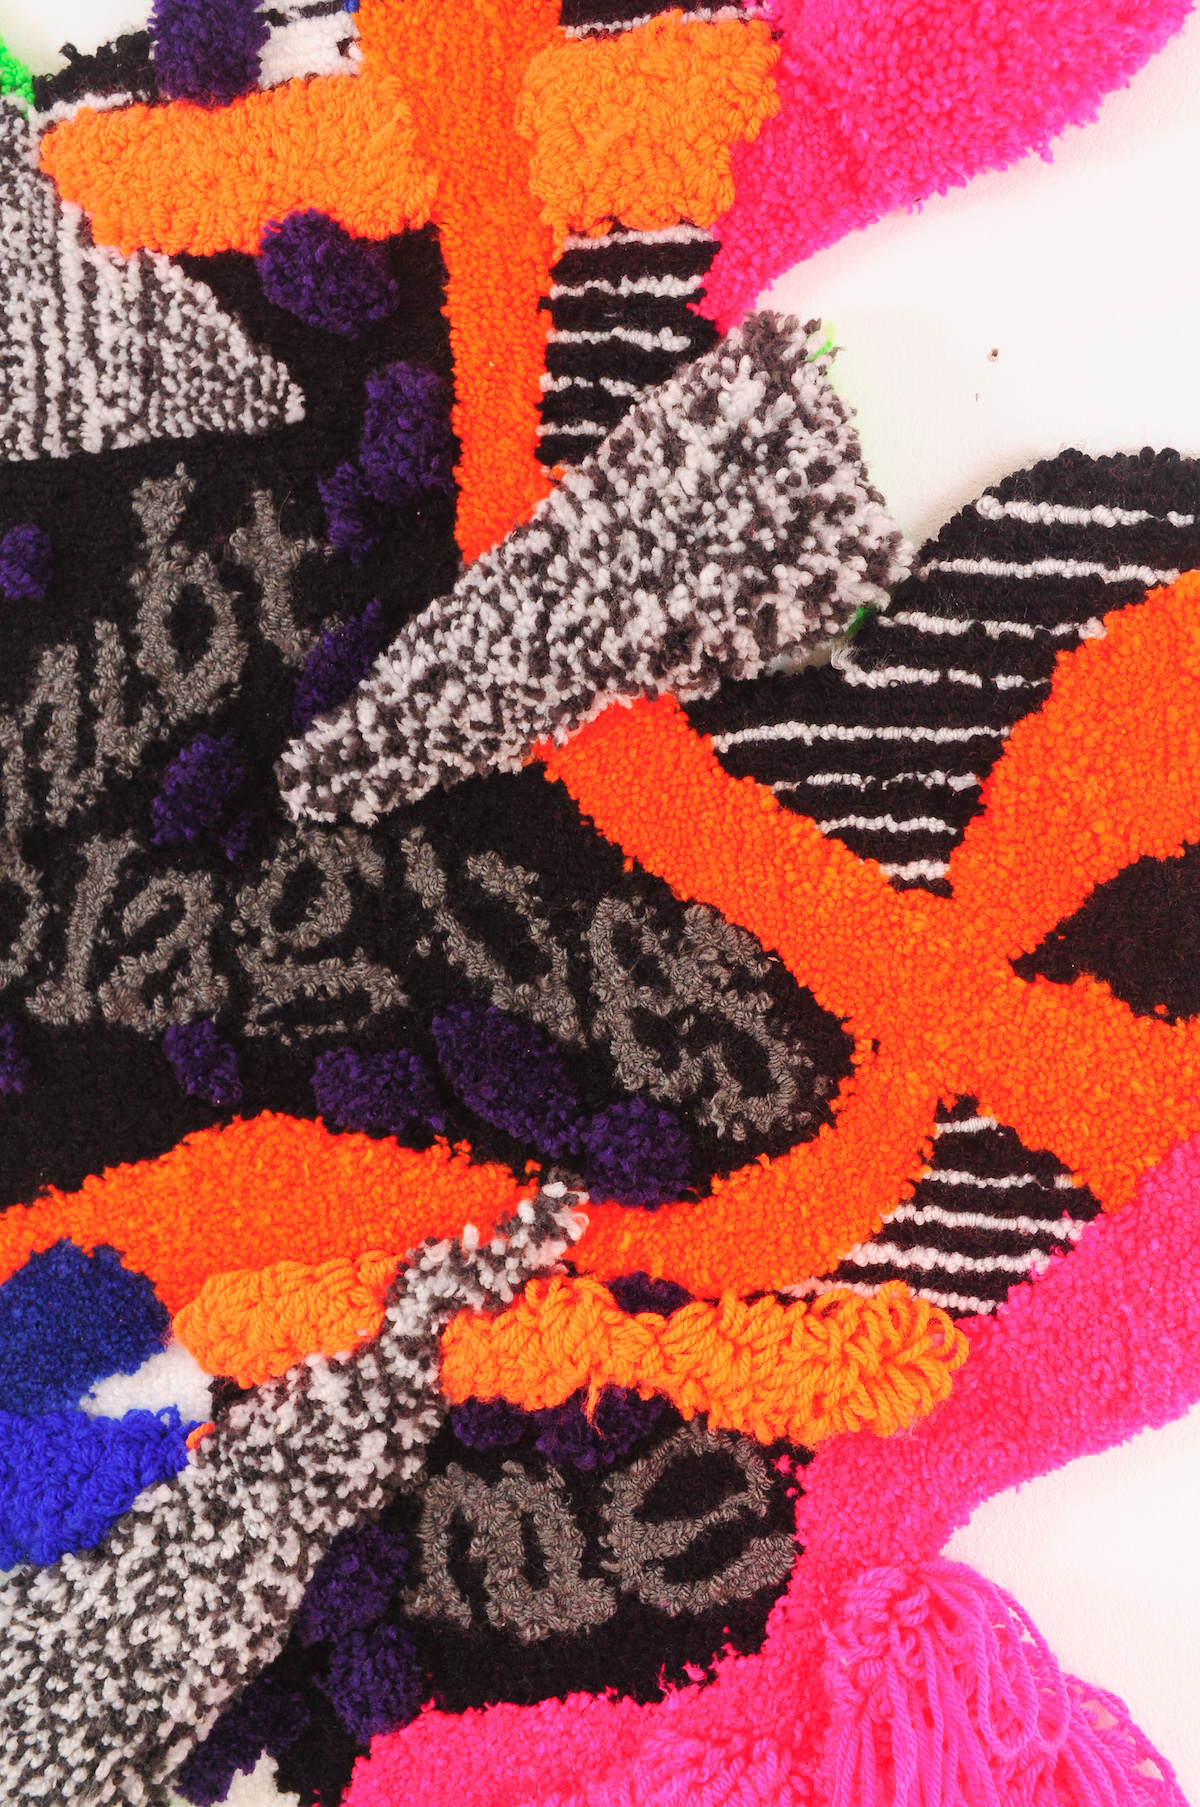 Fabric pieces glued together in abstract shapes in vibrant pink, blue, orange, green, black and gray with text